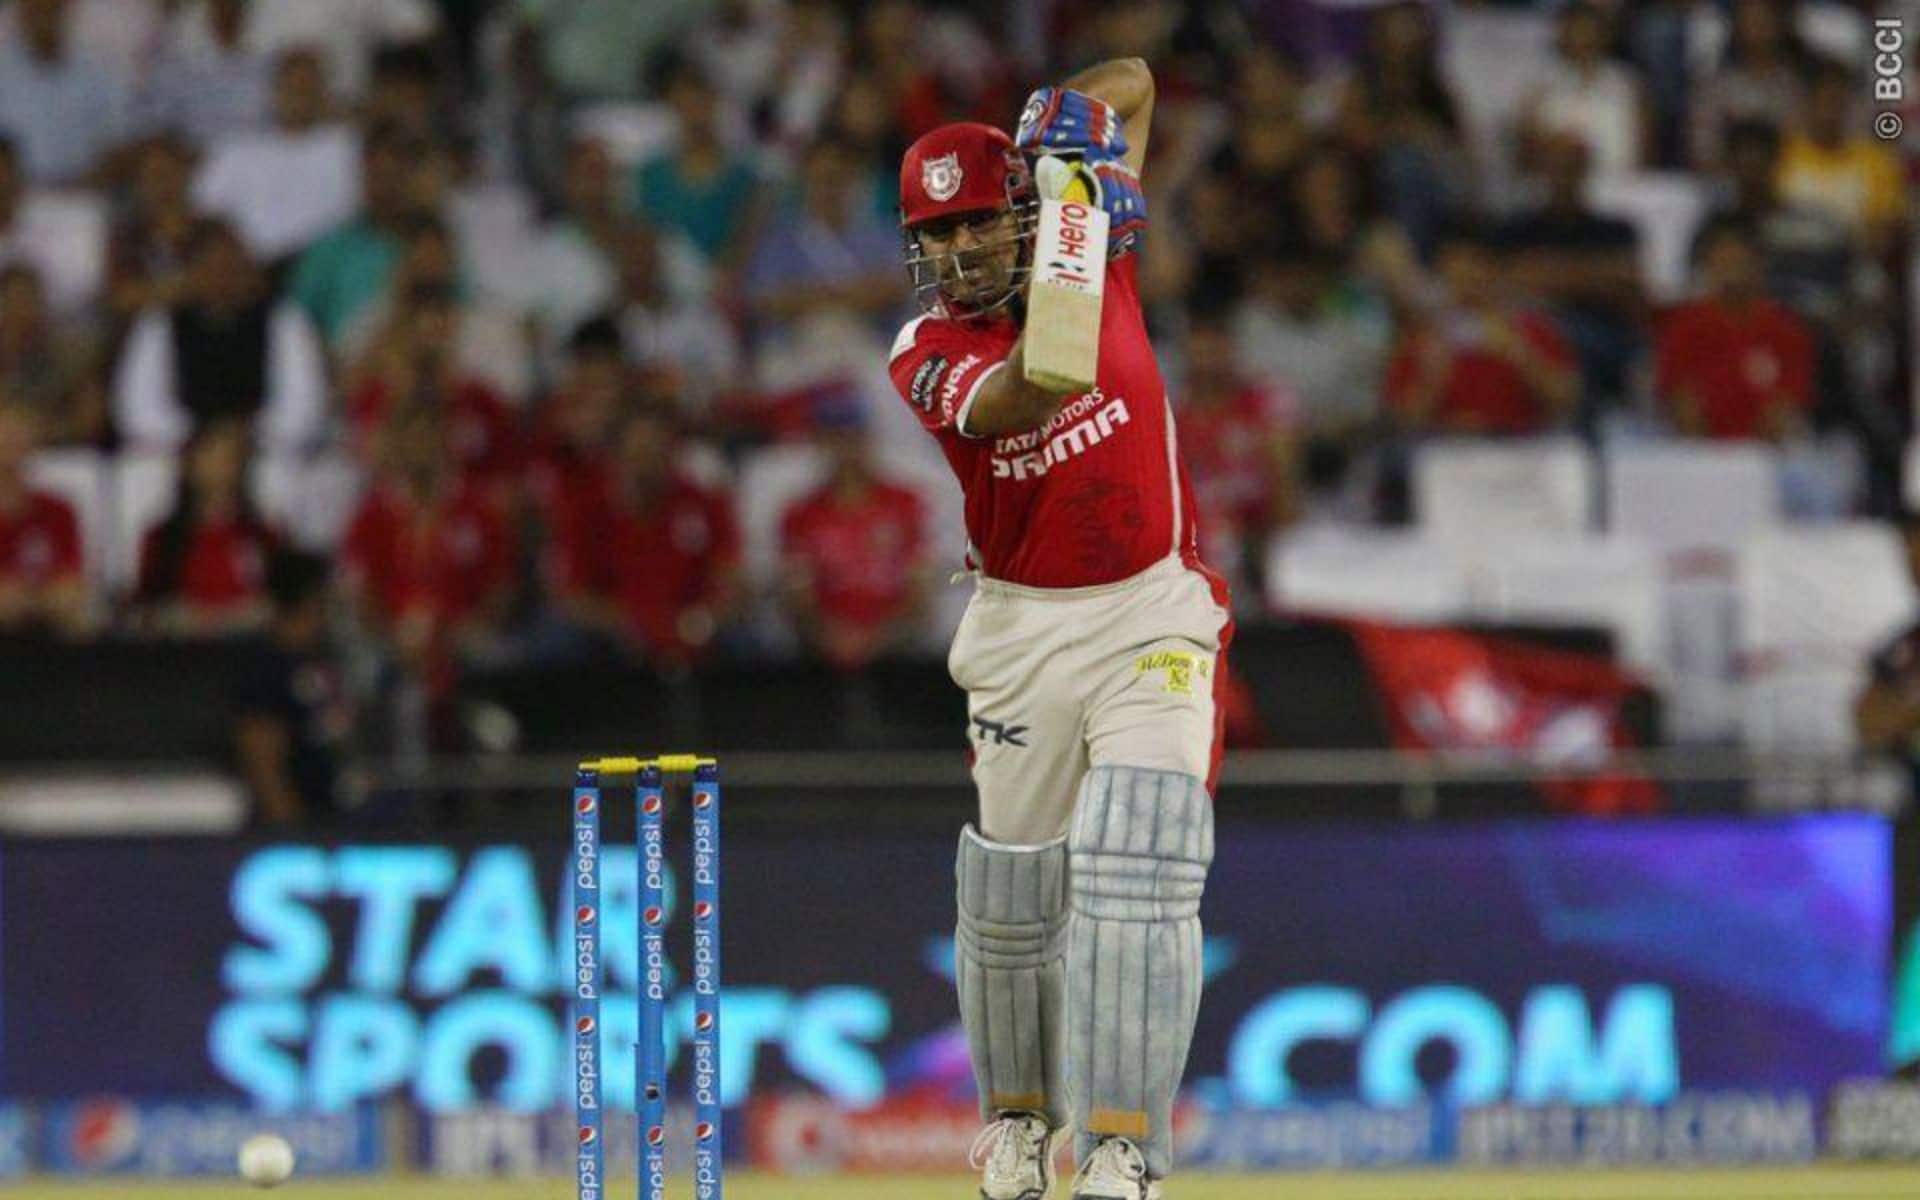 Virender Sehwag has 5 fifties with a strike rate of over 200 (X.com)